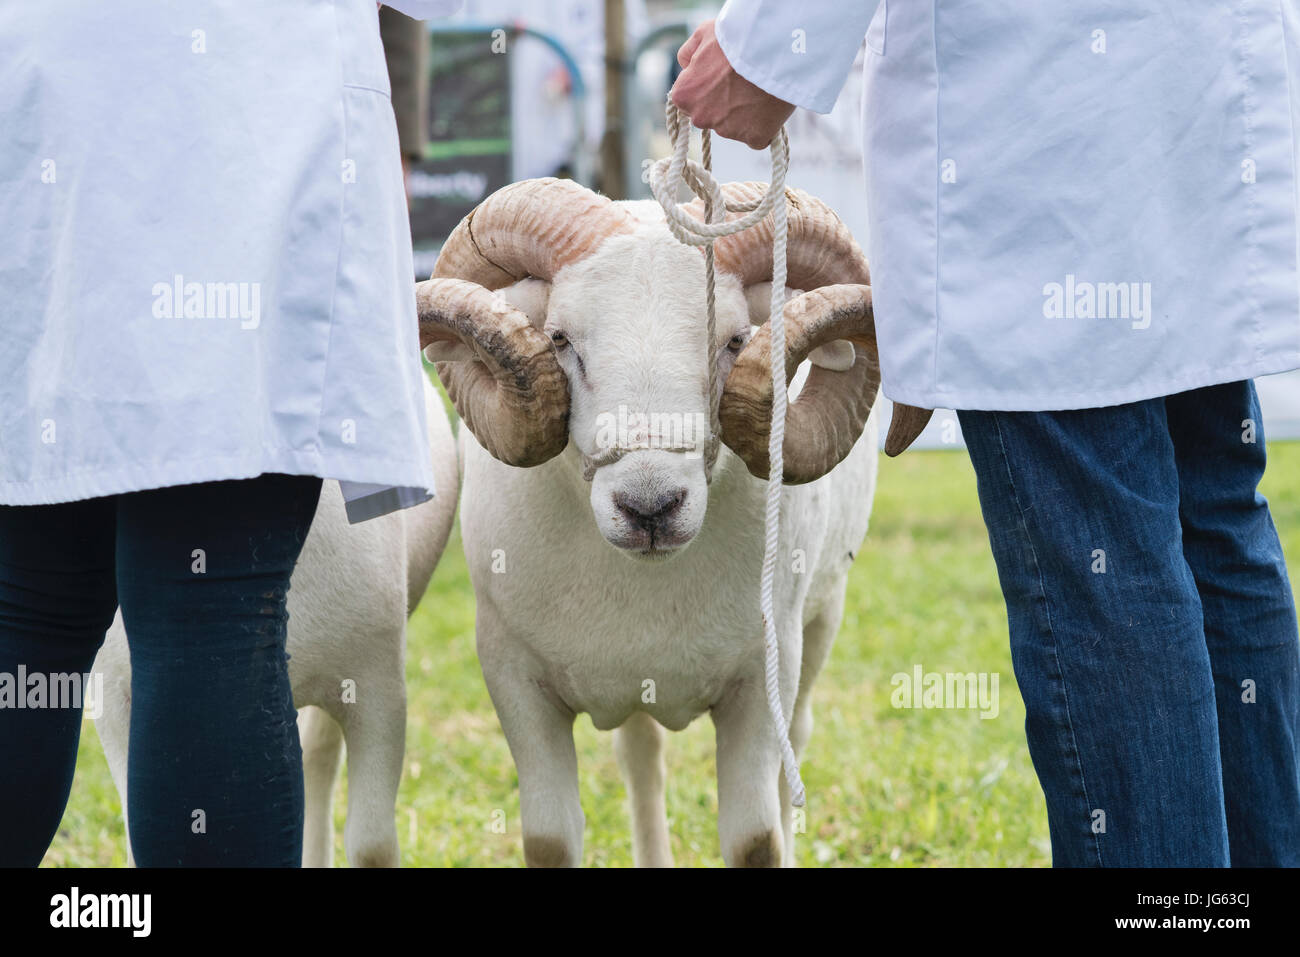 Ovis aries. Wiltshire horned ram / sheep at Hanbury country show, Worcestershire. UK Stock Photo